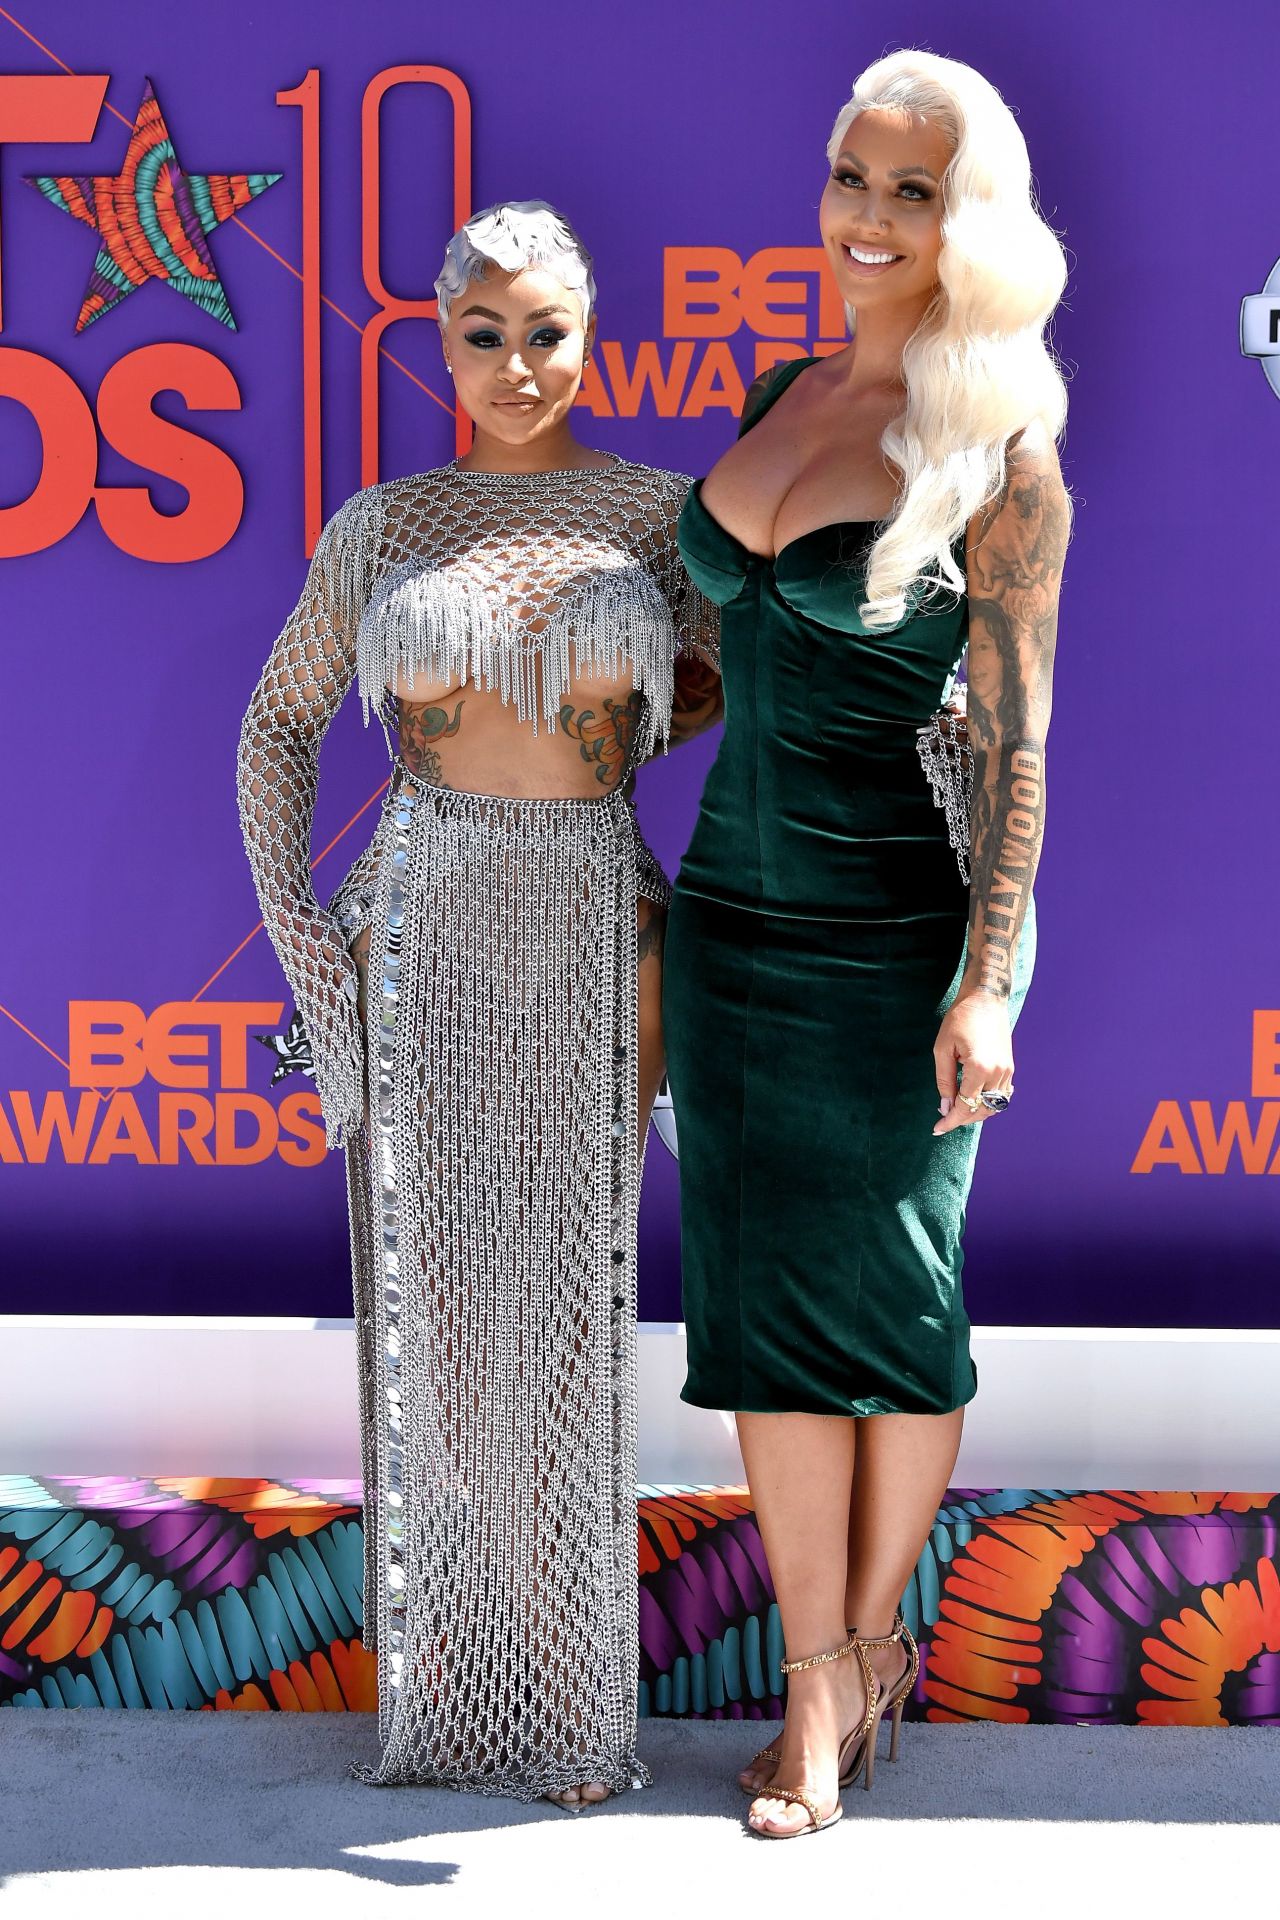 Amber Rose - 2018 BET Awards in Los Angeles1280 x 1920